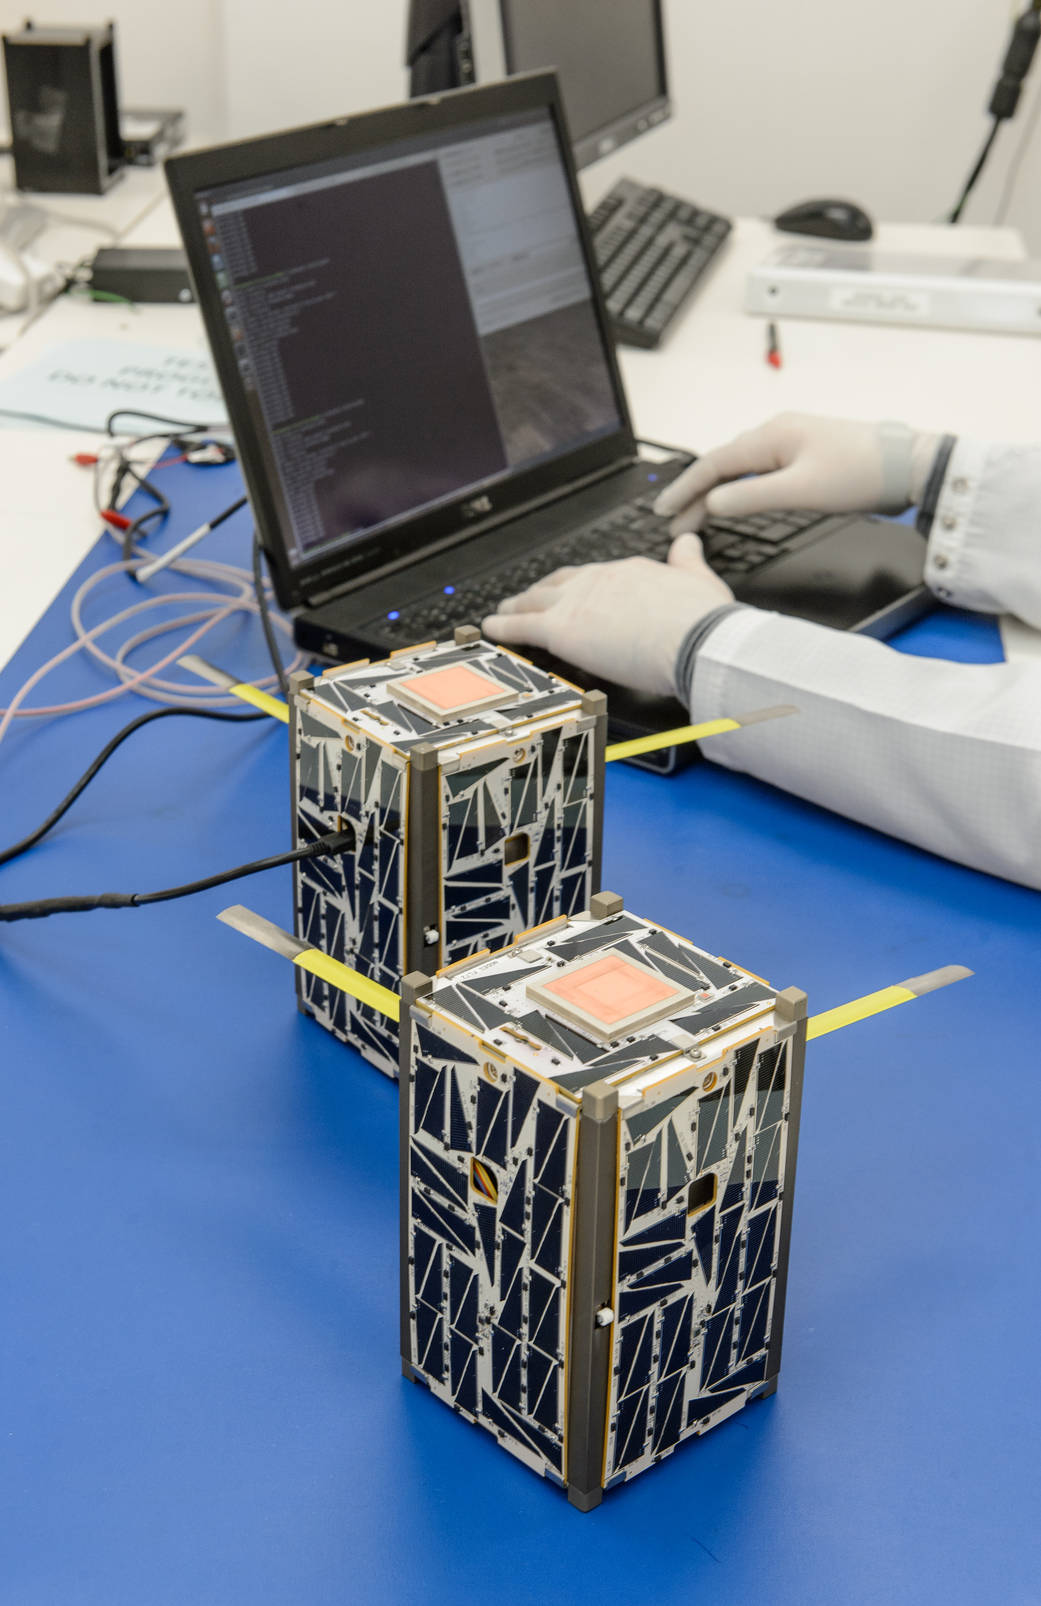 Nodes Satellites Undergoing Software Loading Prior to System Functional Testing